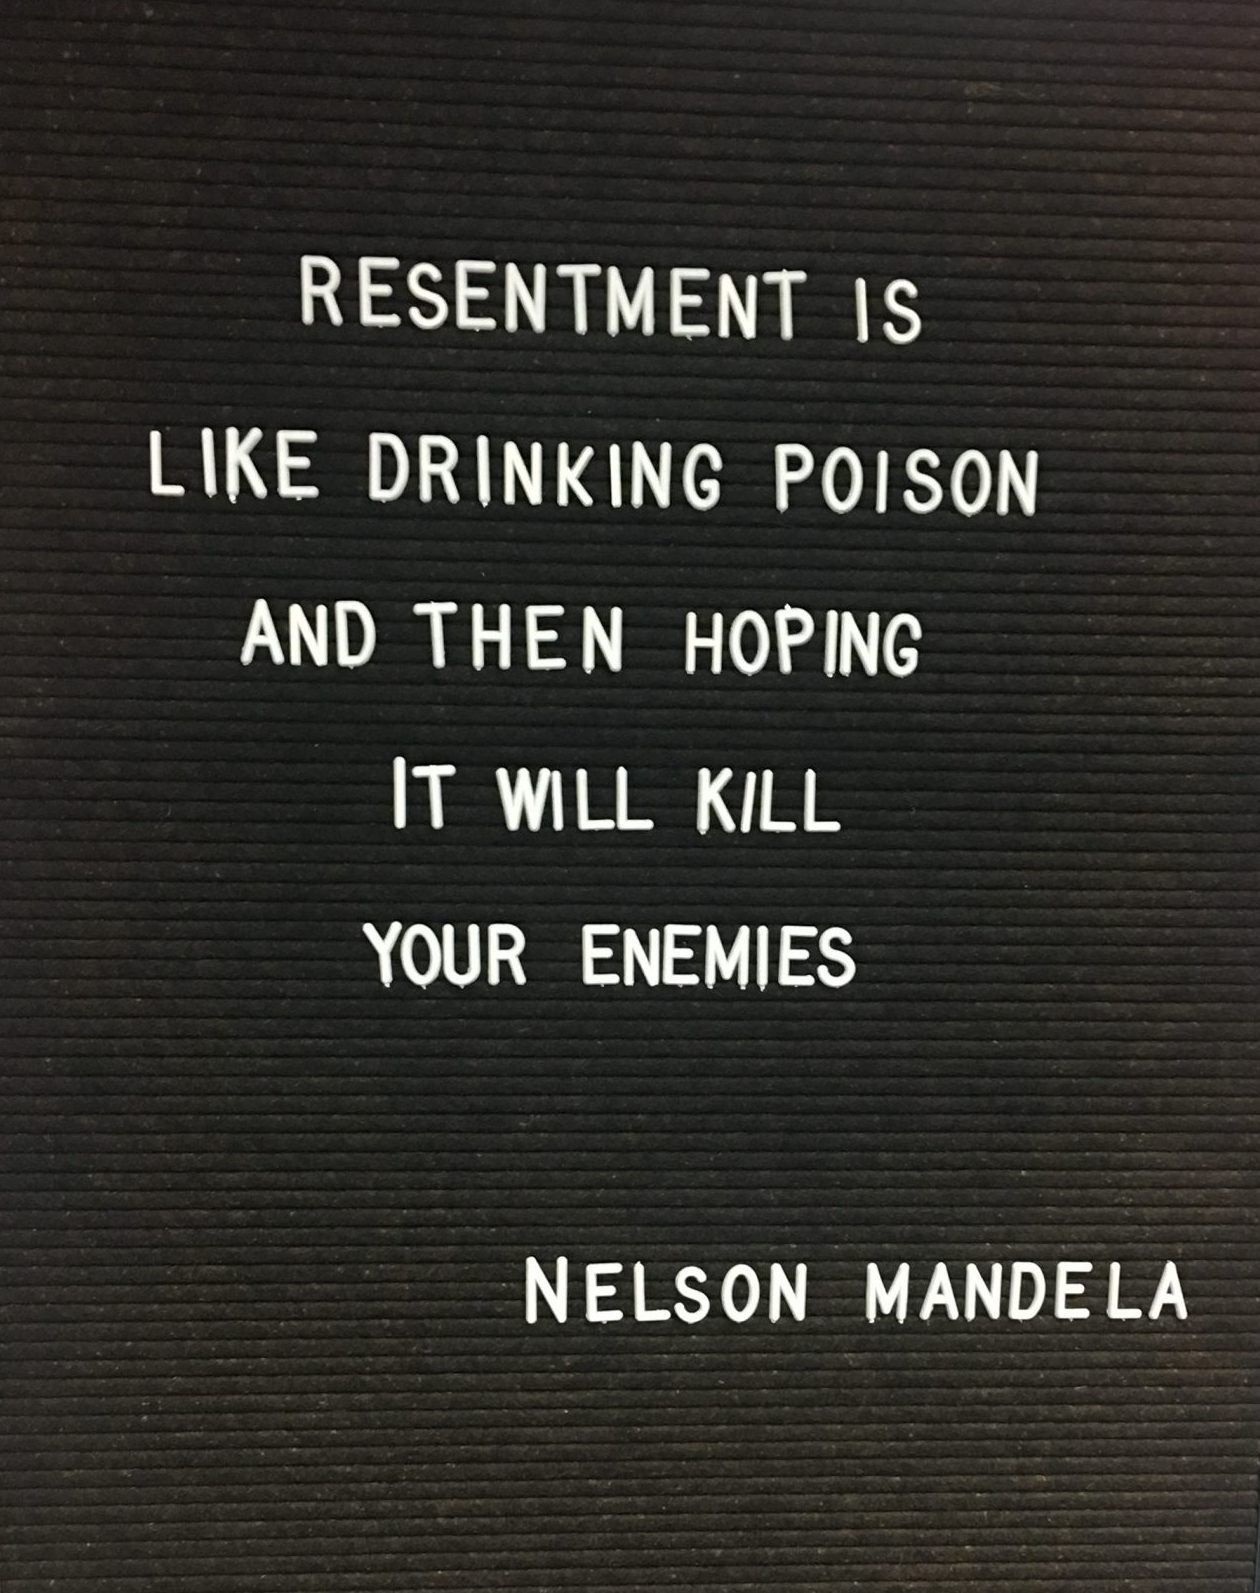 Nelson Mandela Quote about Resentment